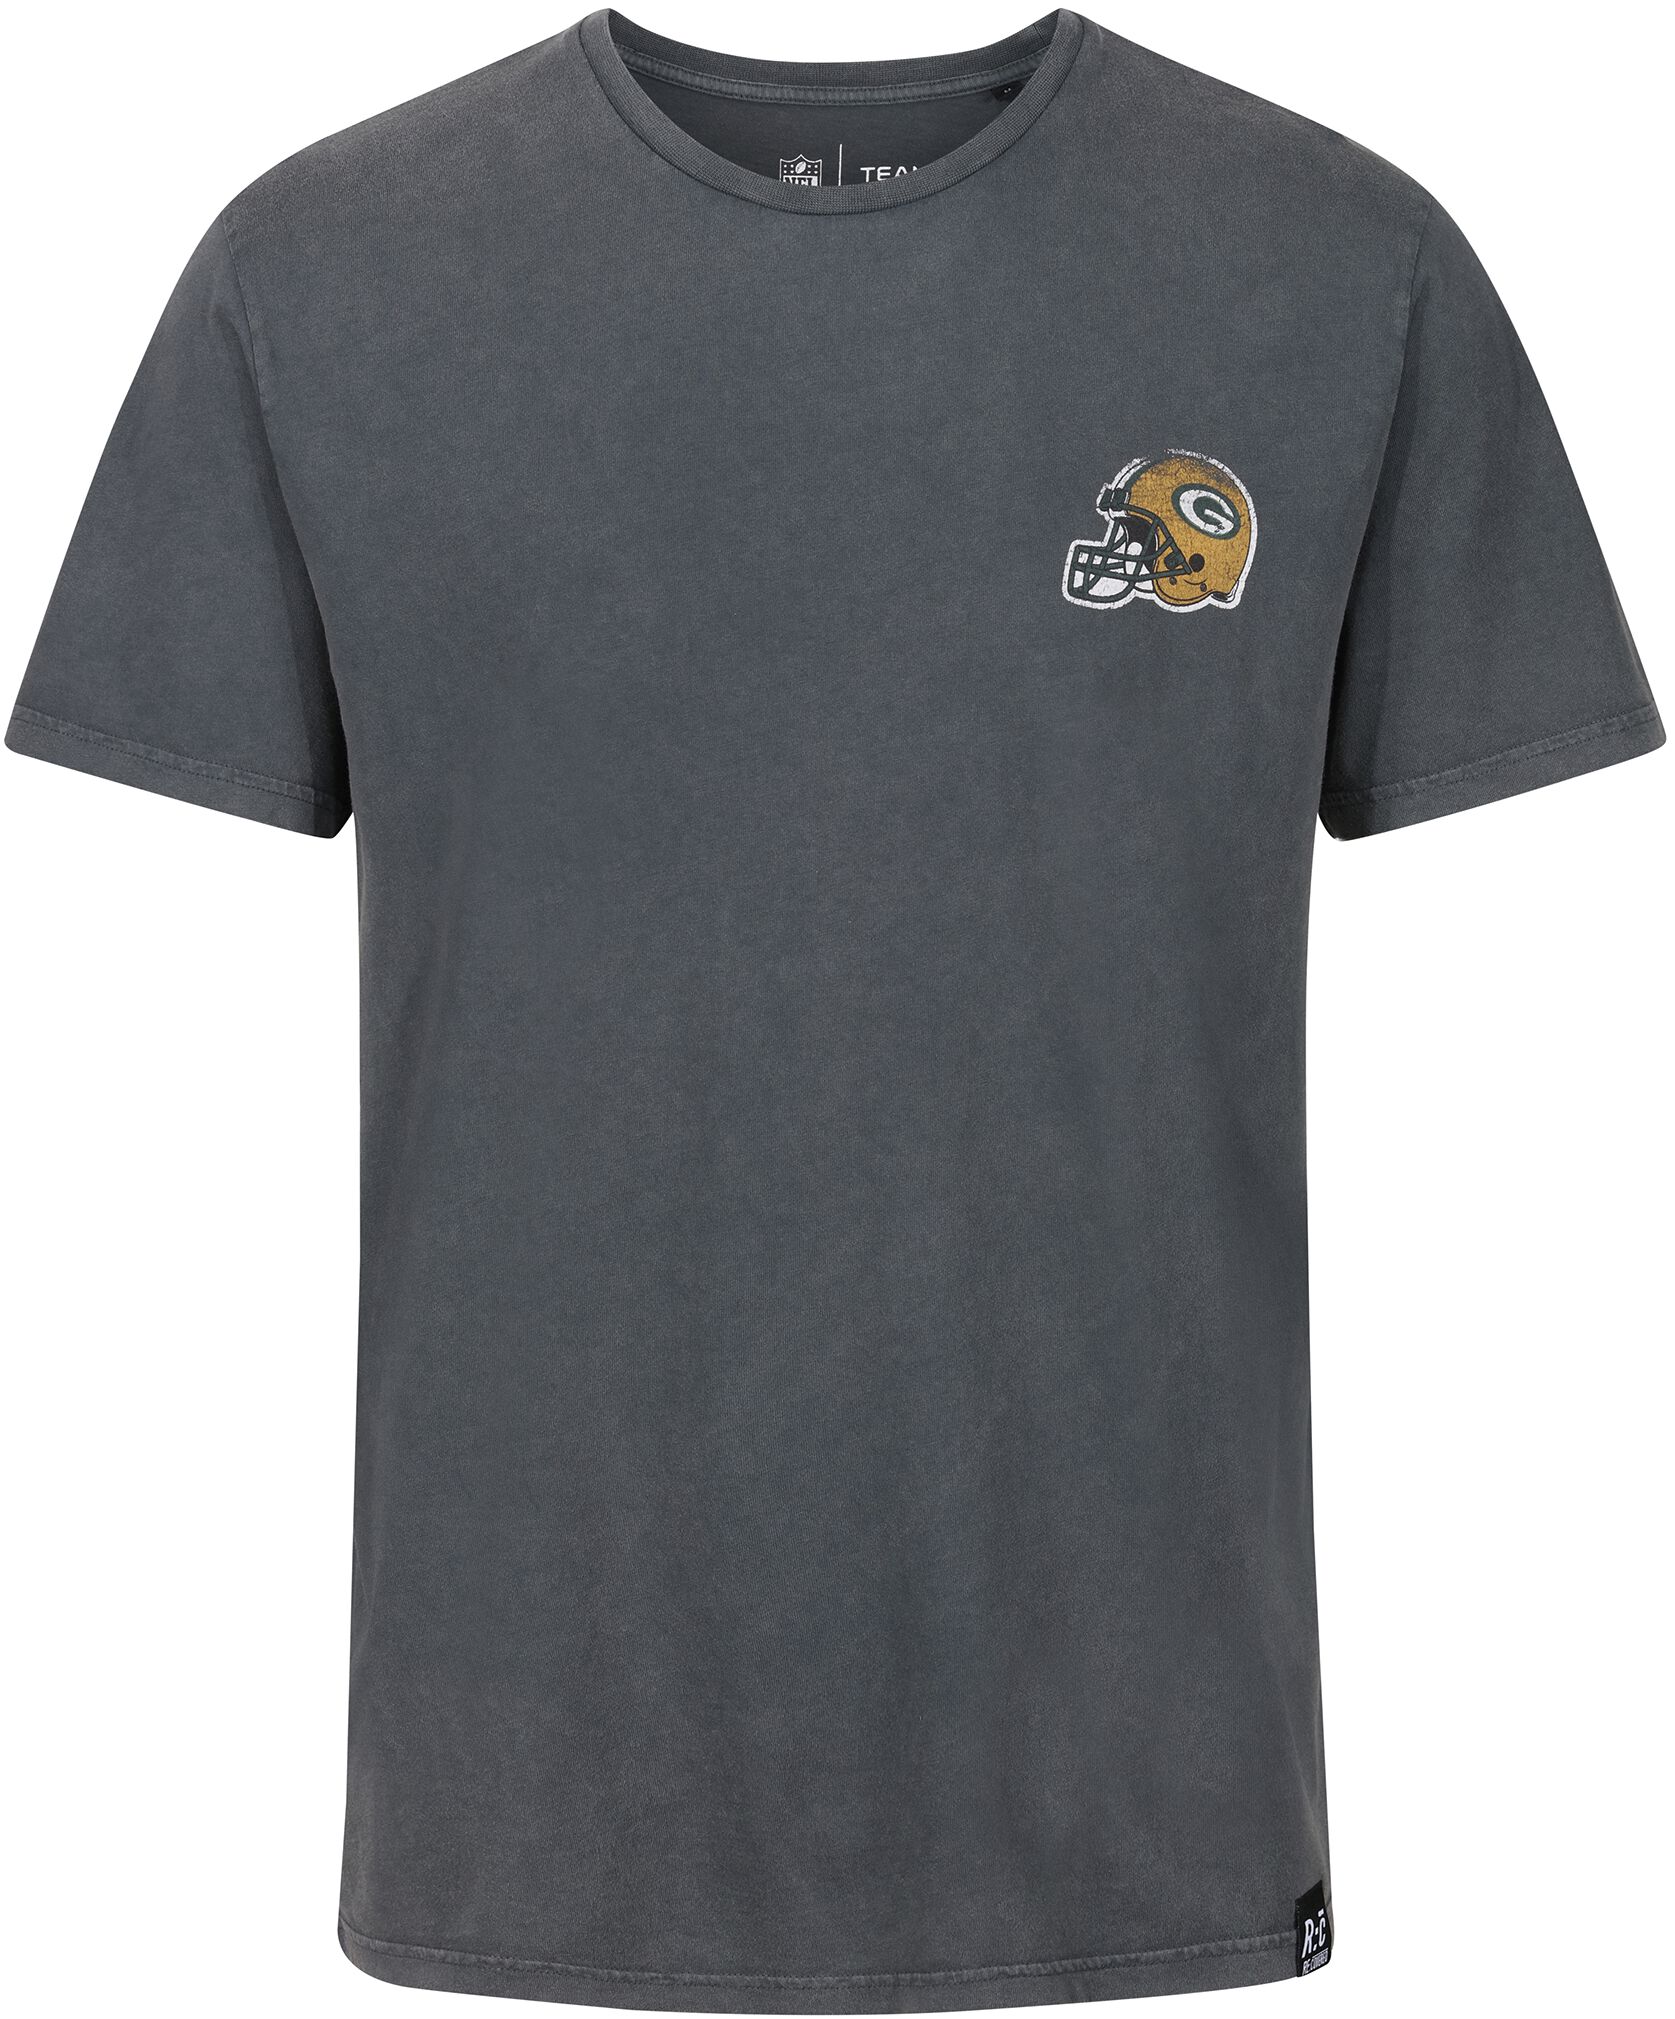 NFL NFL PACKERS COLLEGE BLACK WASHED T-Shirt multicolor in L